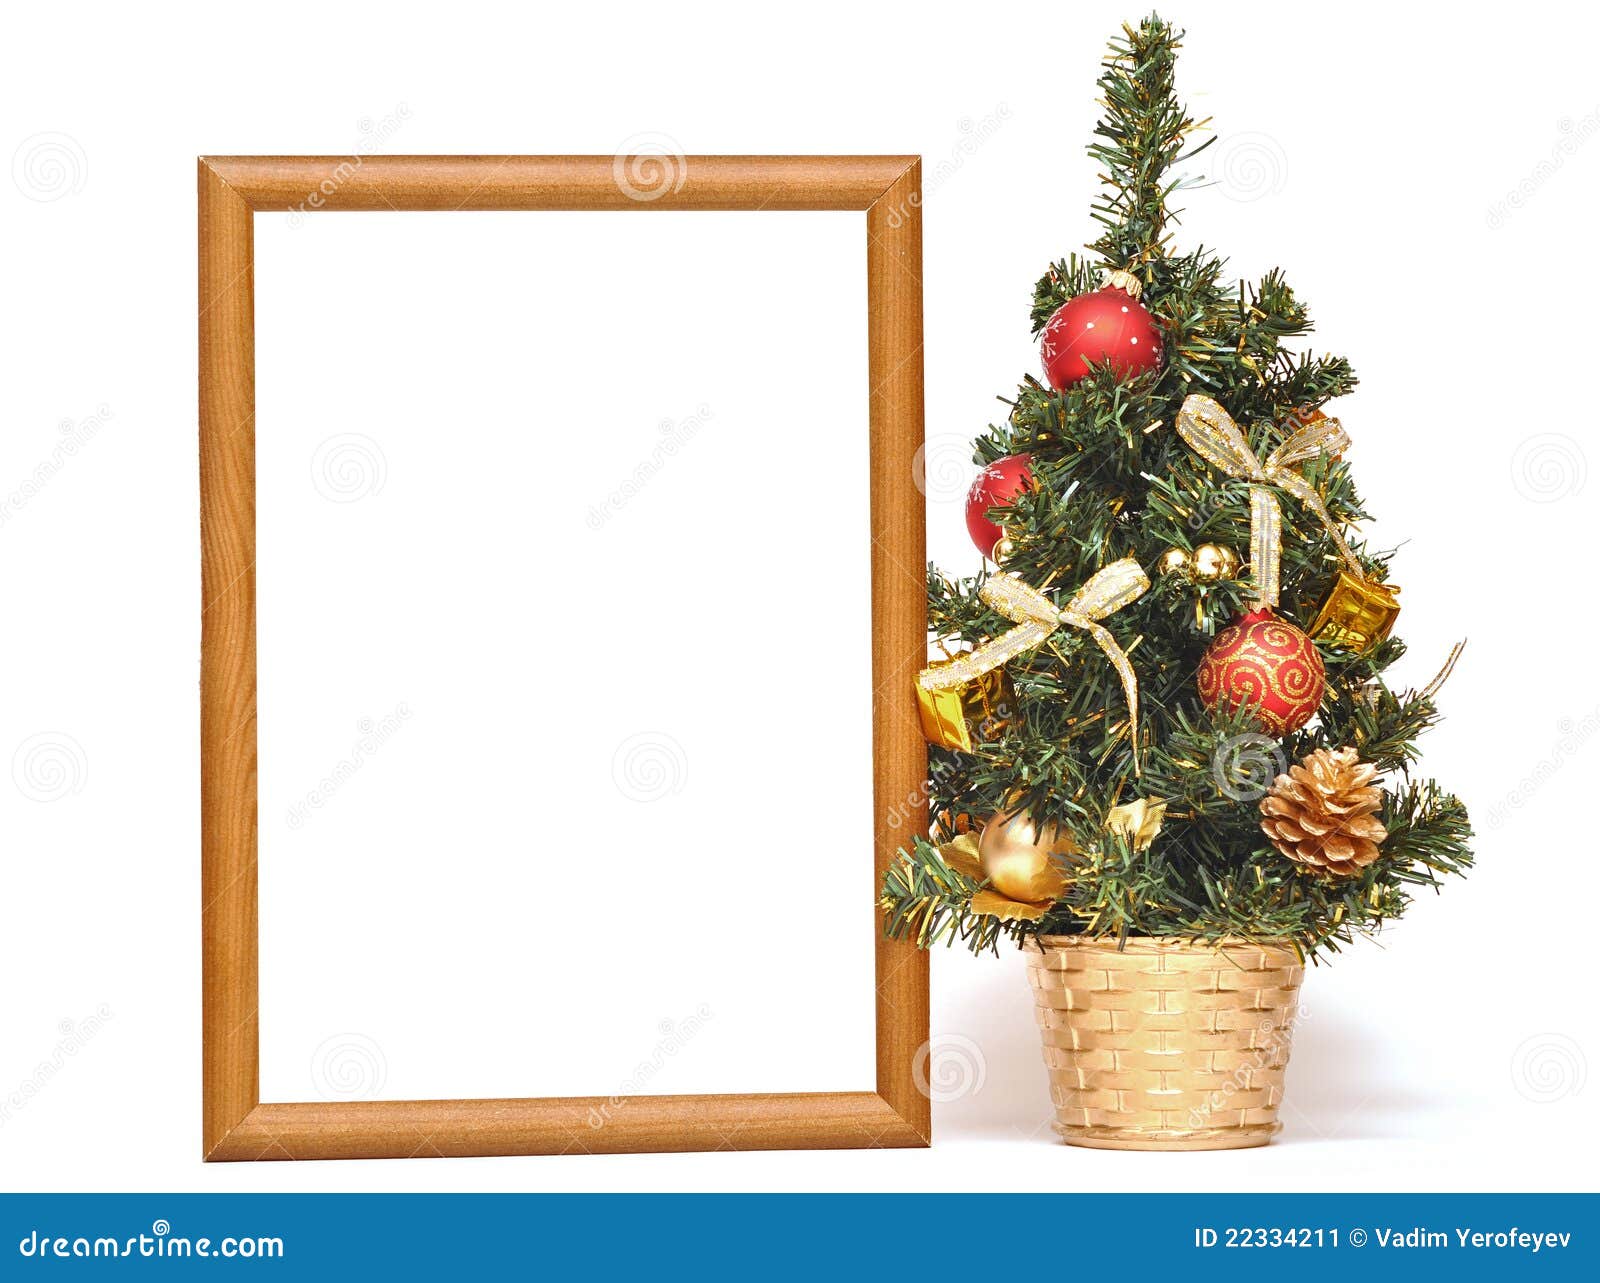 Wooden Frame And Christmas Tree Stock Image - Image: 22334211